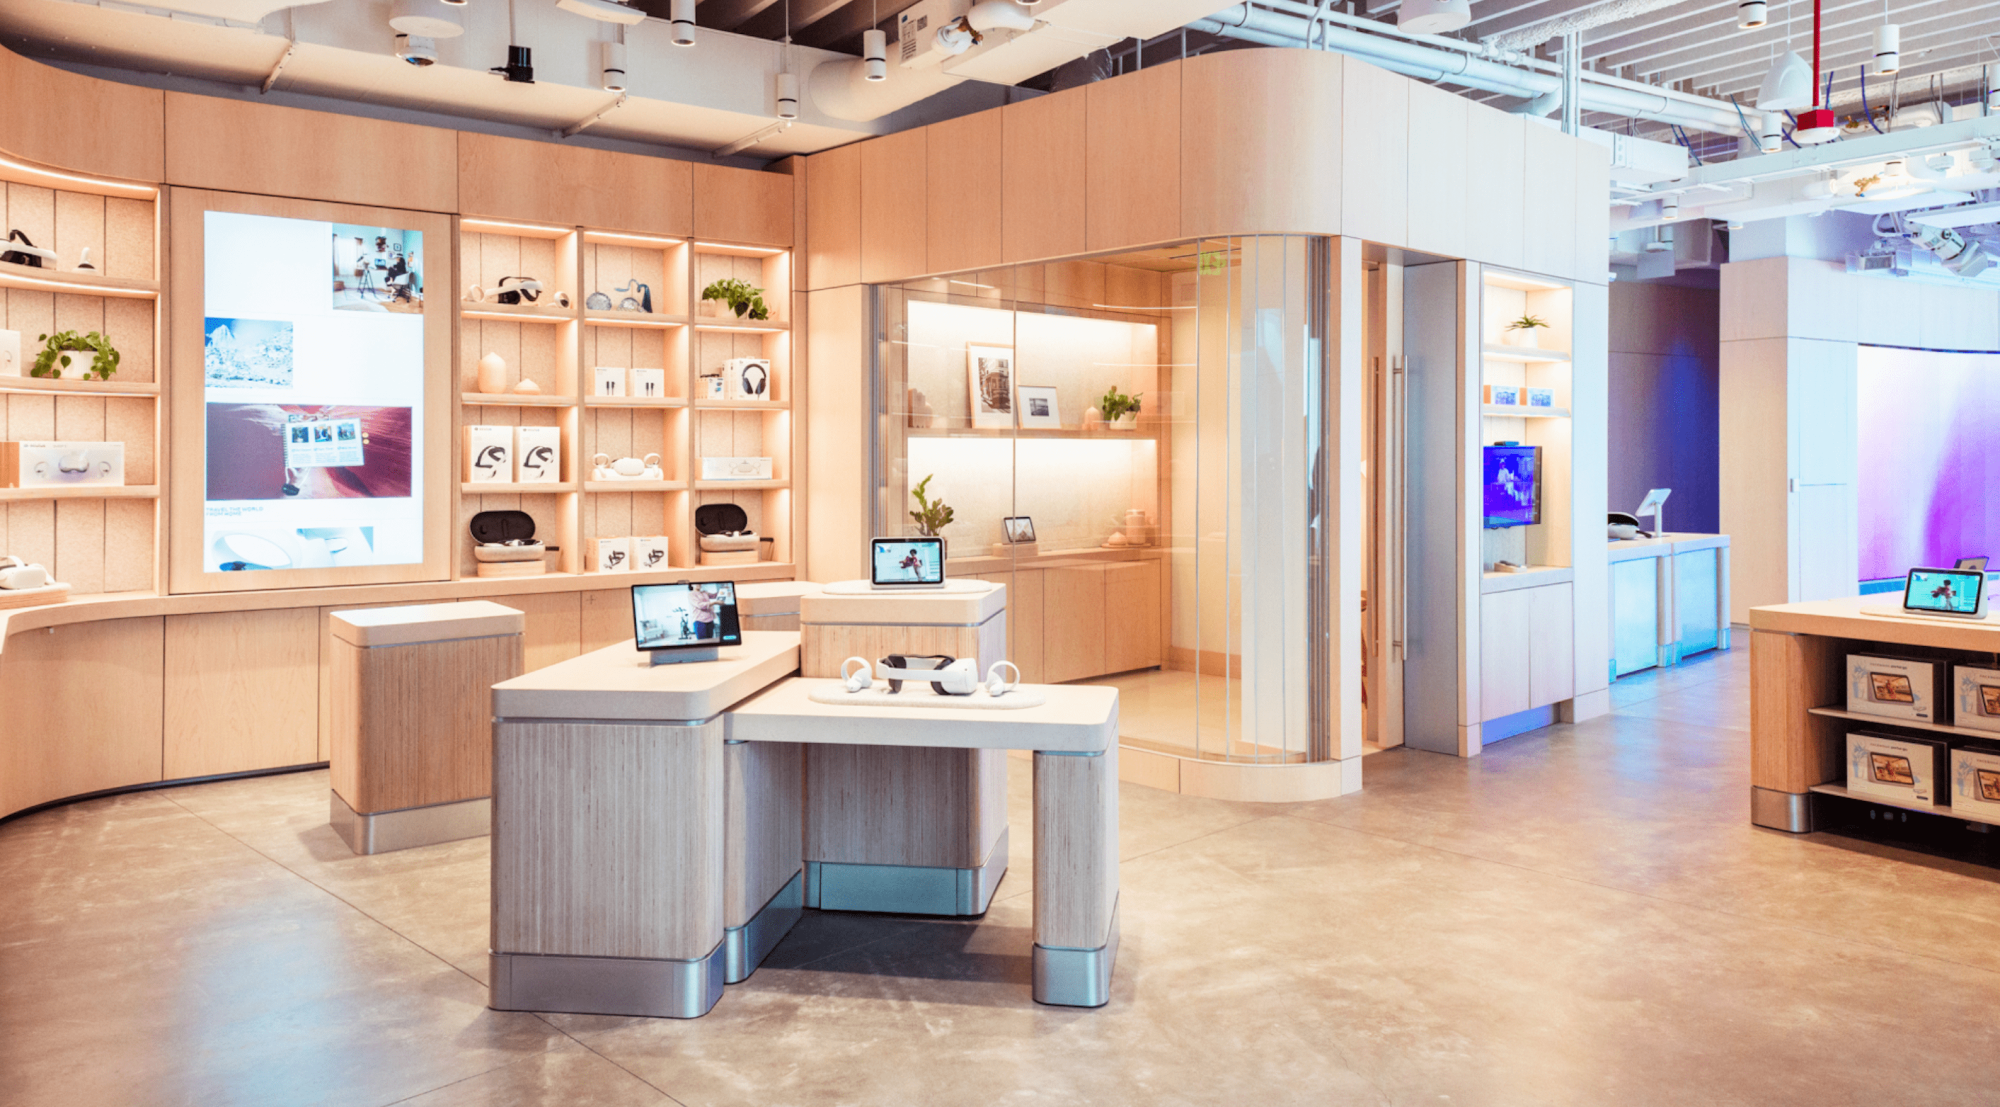 Meta Store – Facebook’s First Physical Retail Space